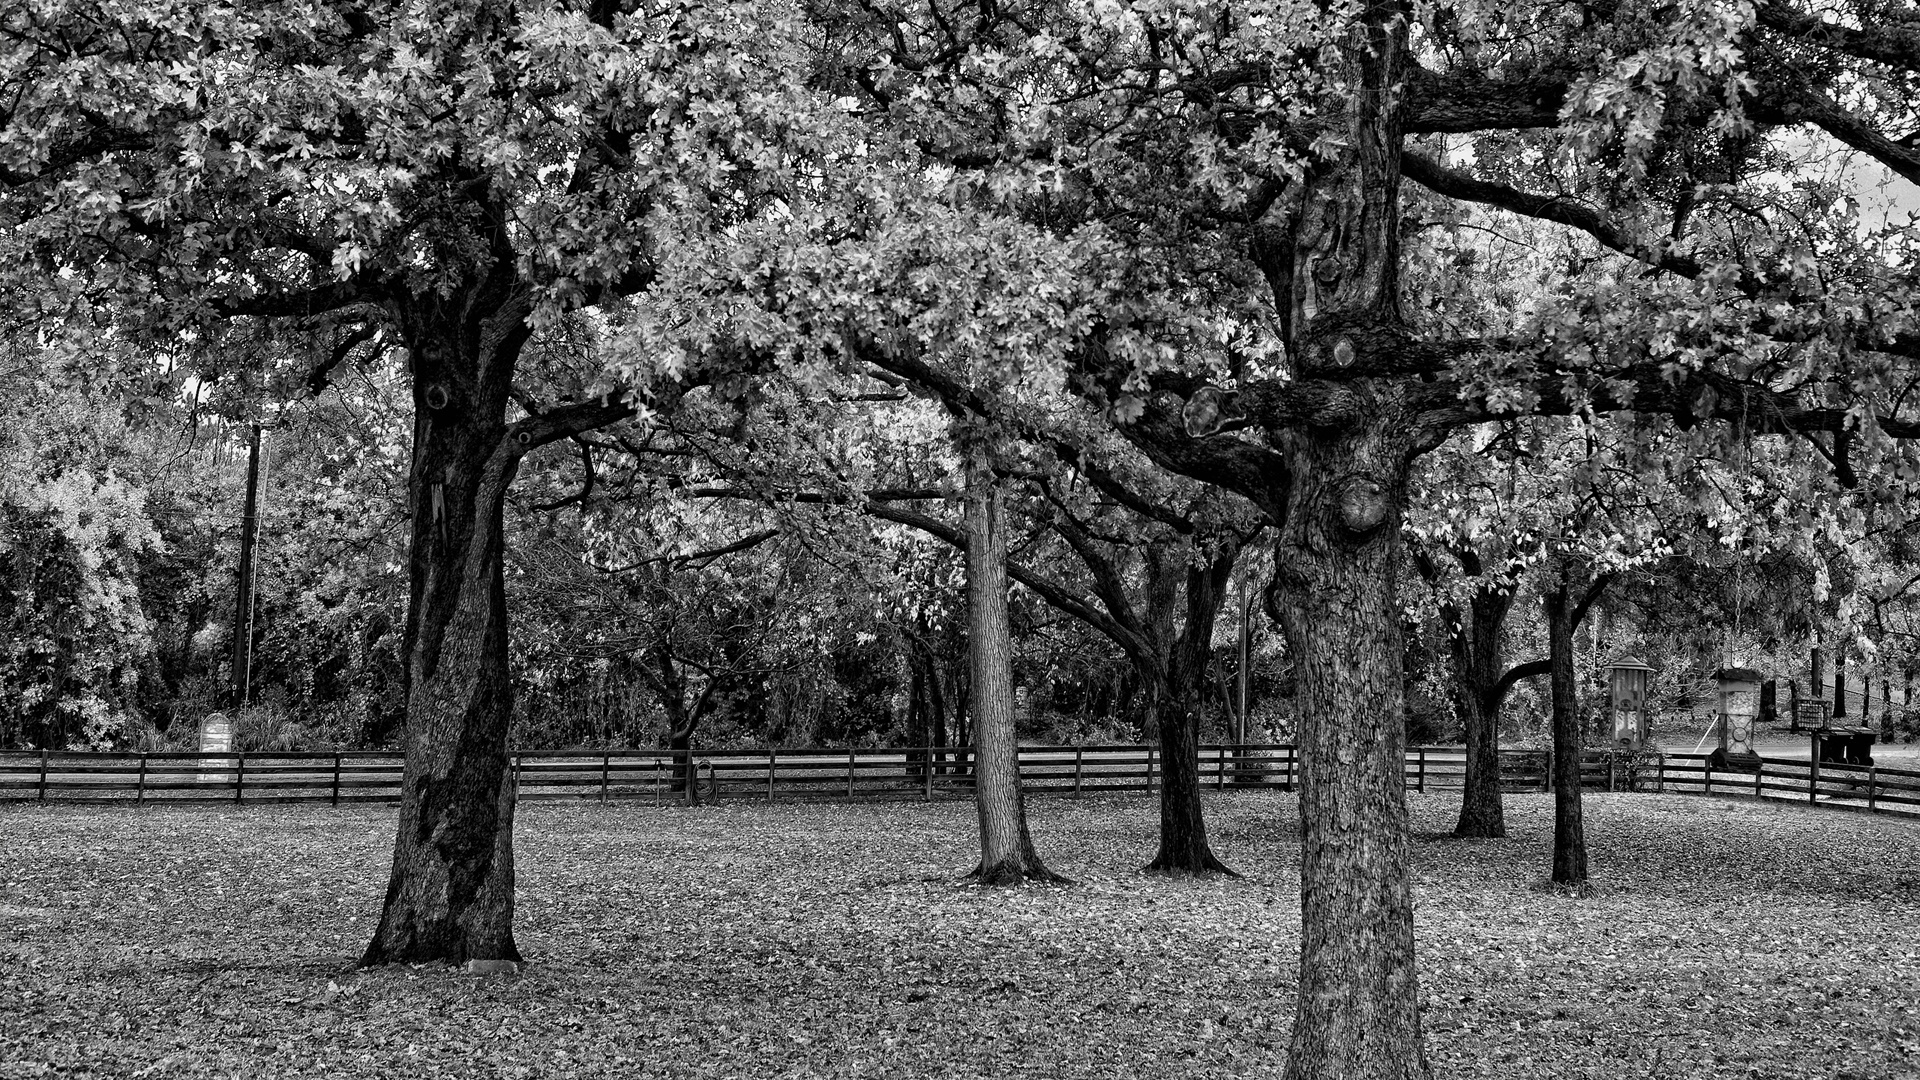  Black  And White  Tree  High Definition Wallpapers  HD 